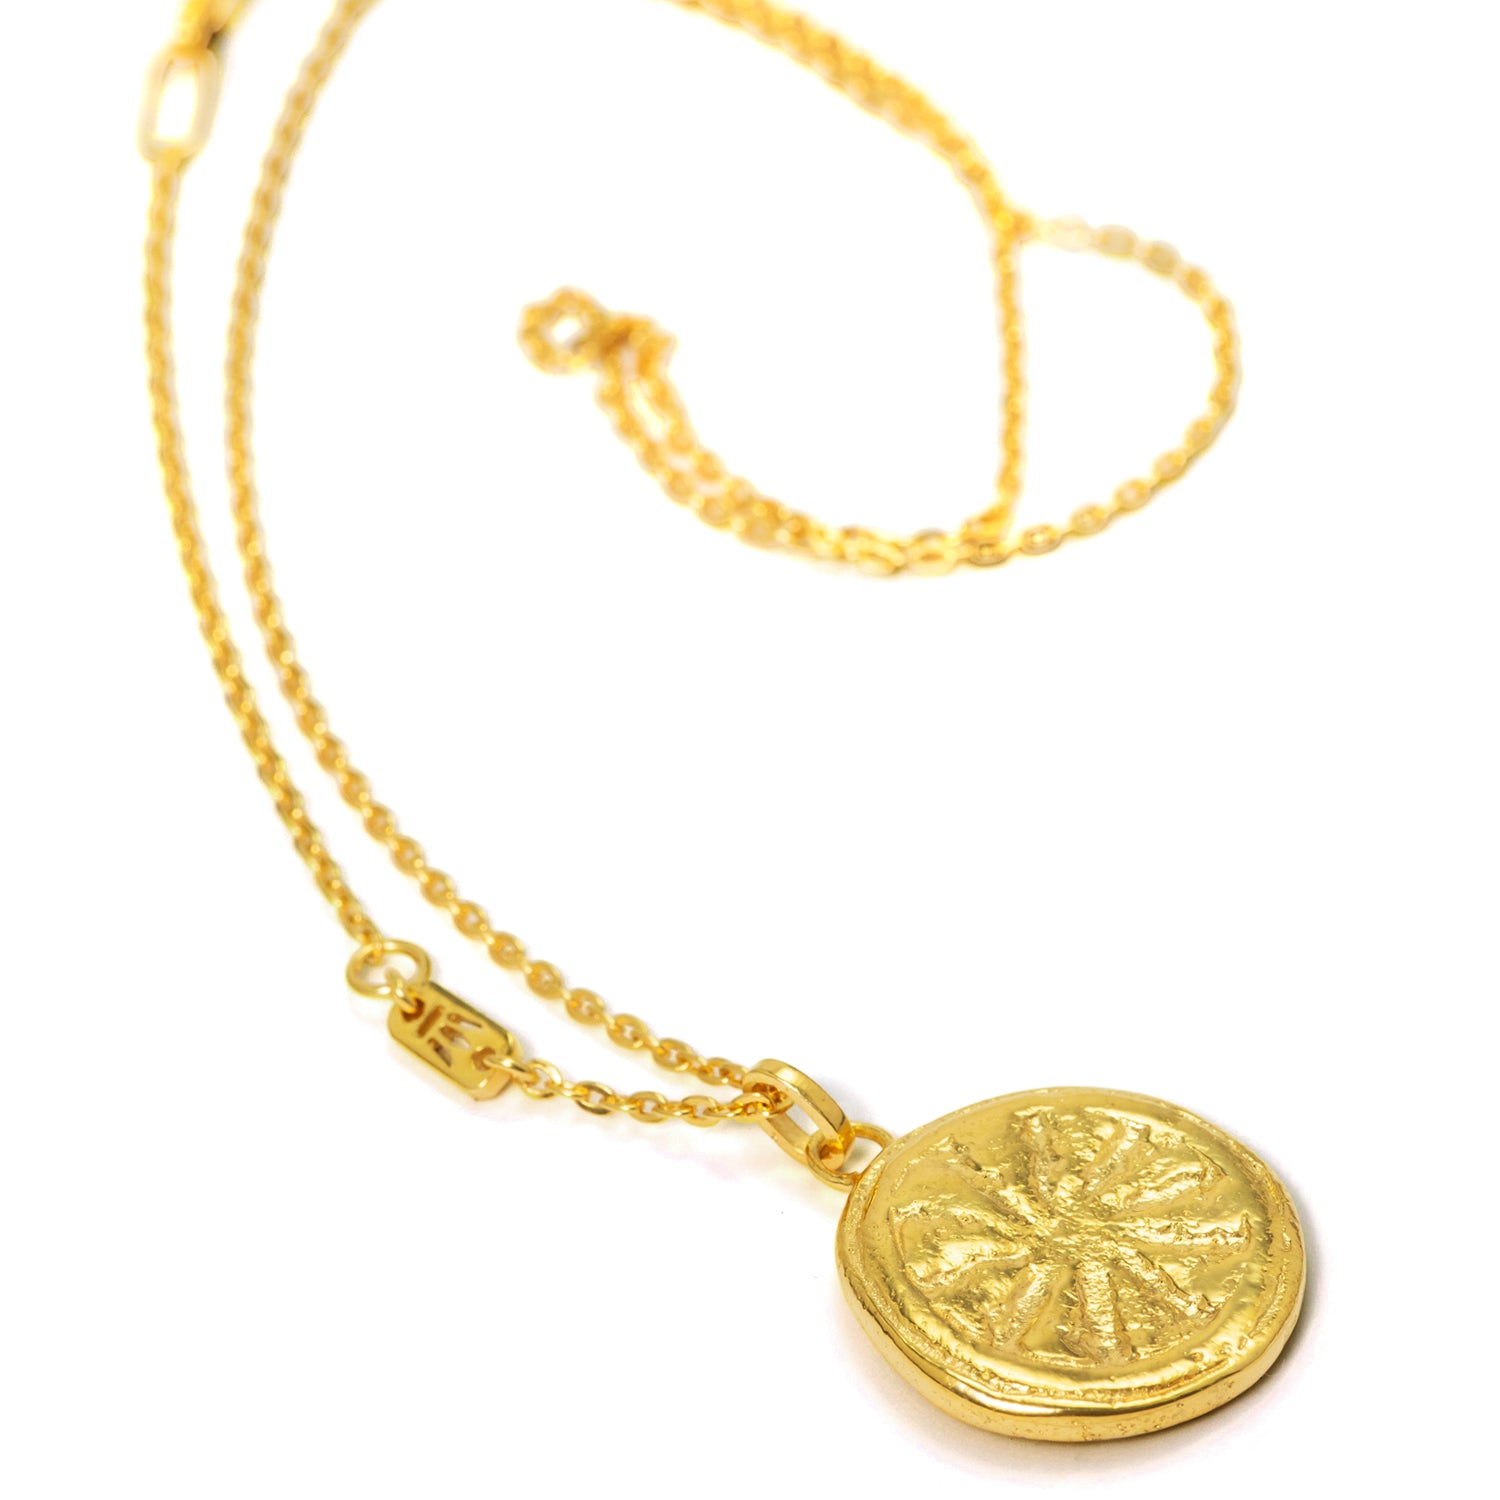  Gold-plated Dharma wheel pendant by ETERNAL BLISS - Spiritual jewelry